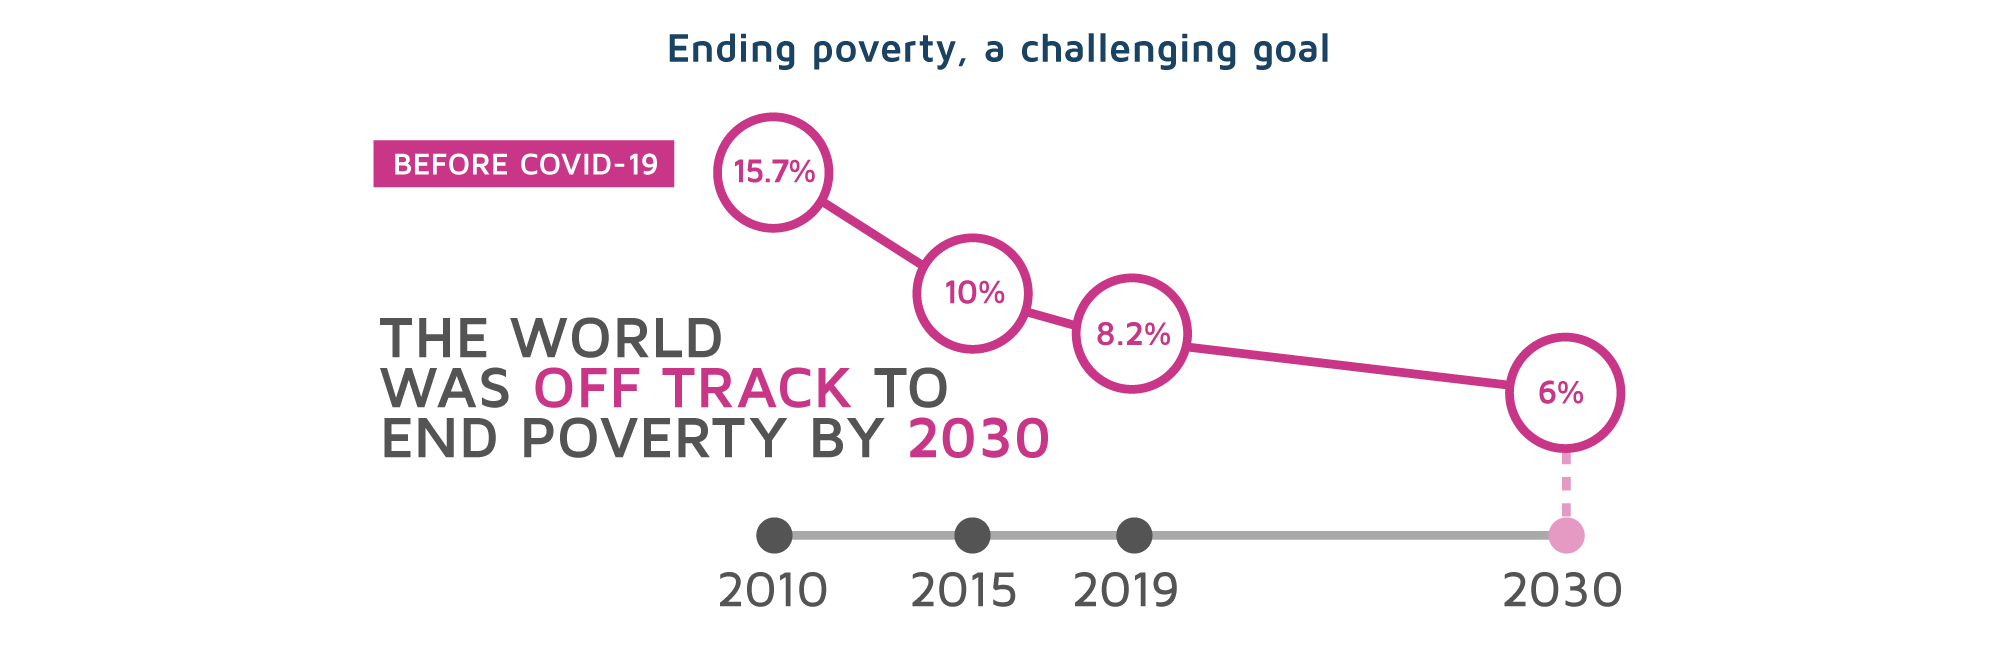 The world was off track to end poverty by 2030